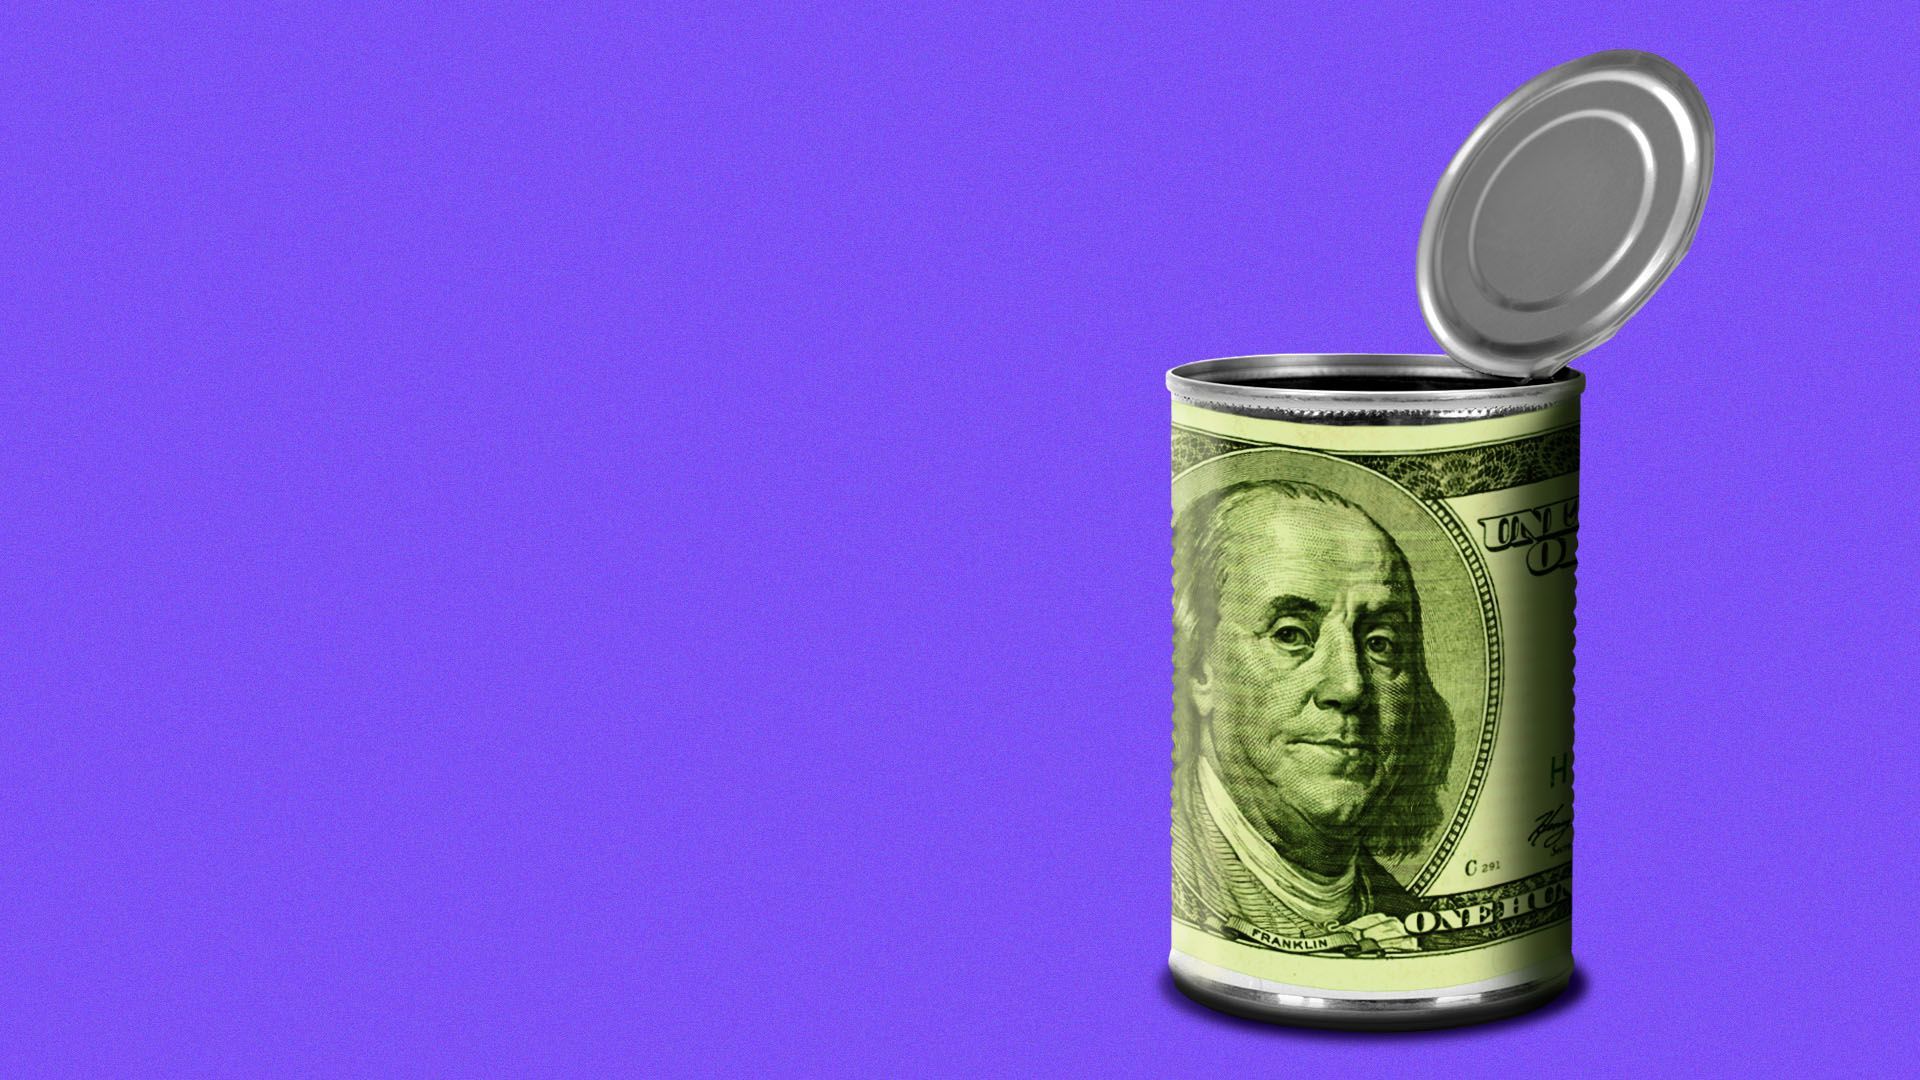 Illustration of an open tin can with a hundred dollar bill on it